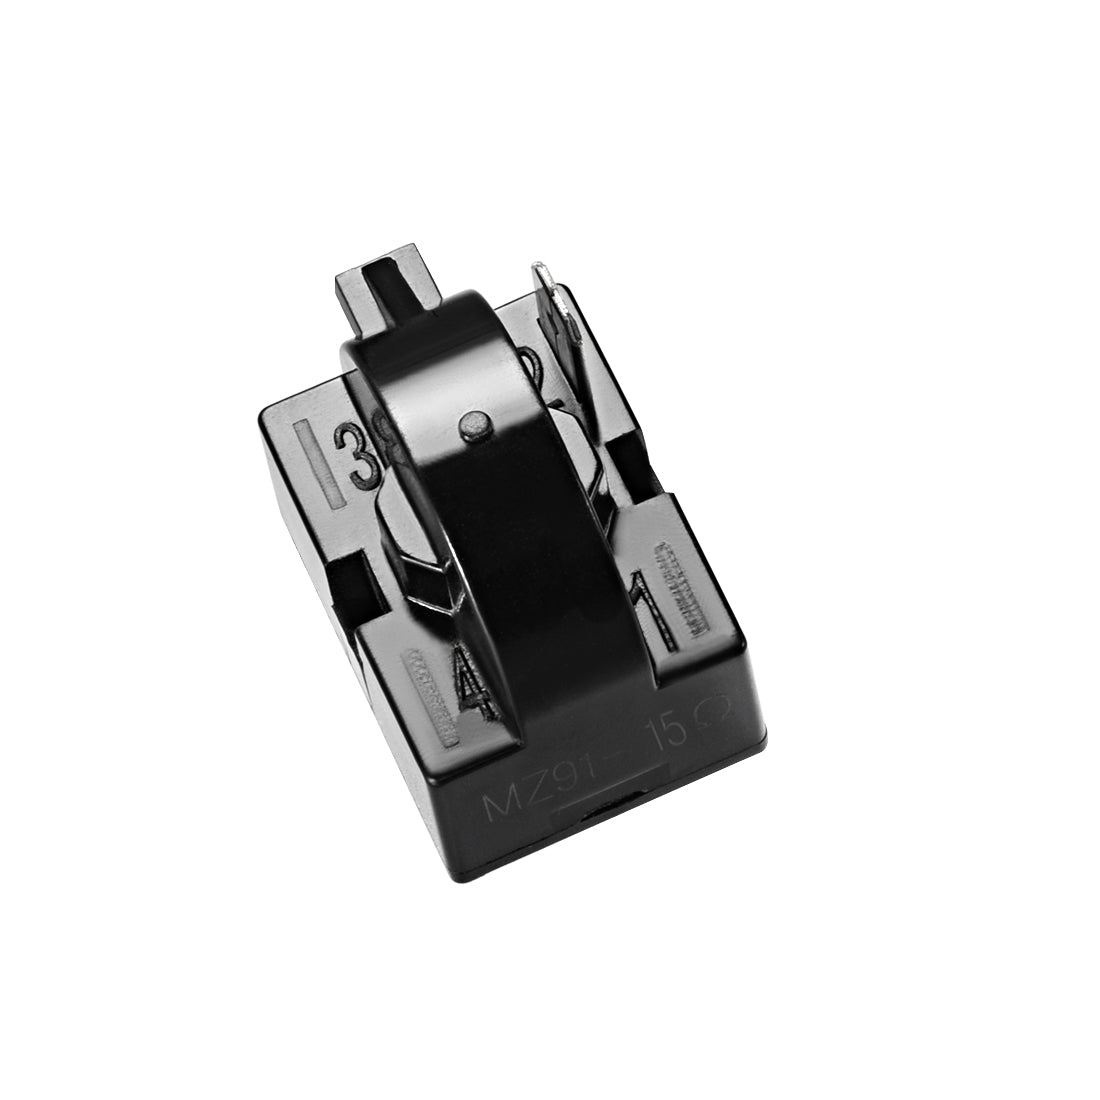 uxcell Uxcell 15 Ohm 1 Pin Refrigerator  Starter Relay Black